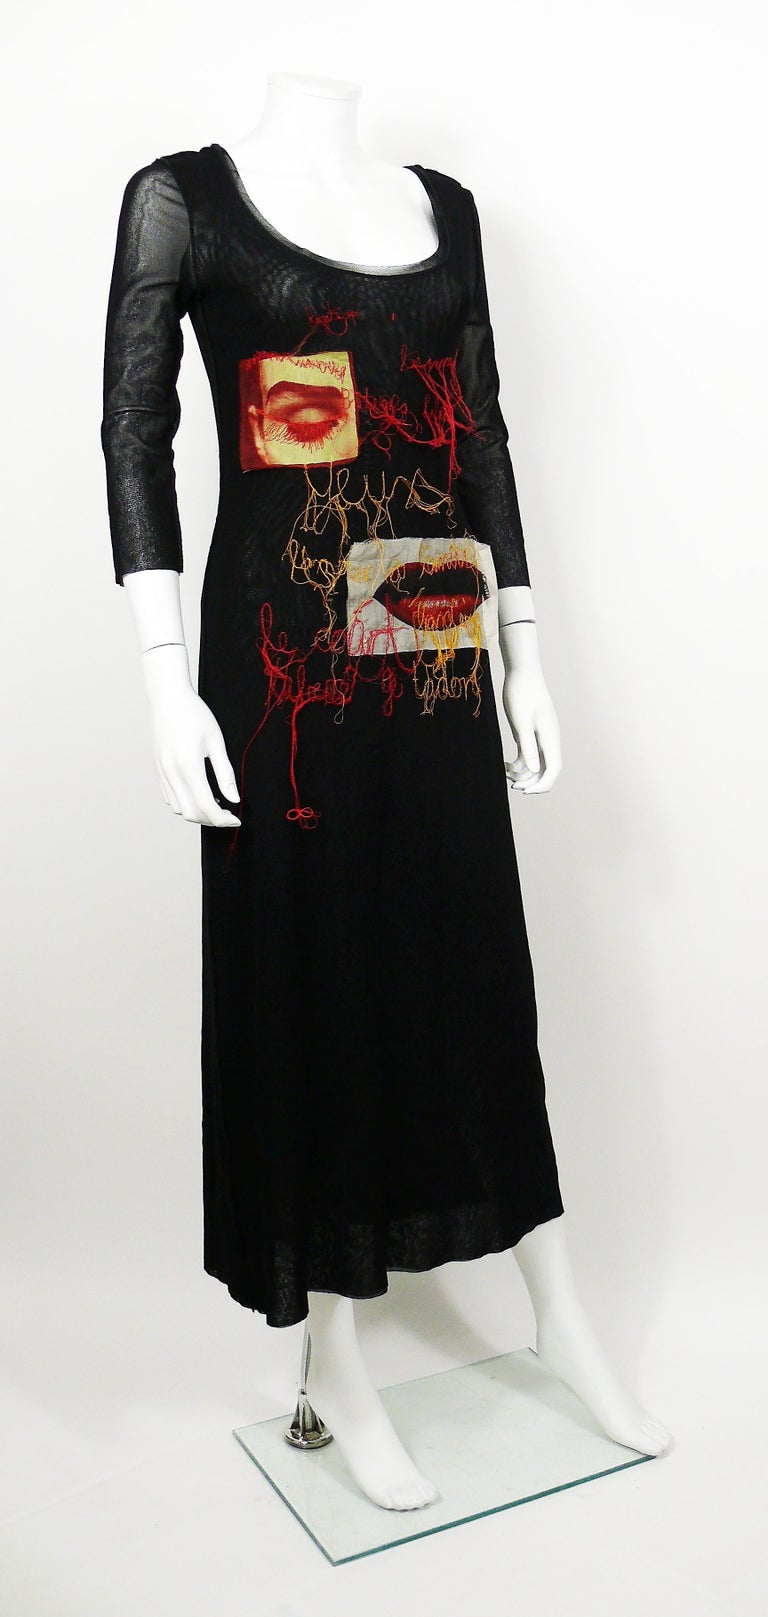 JEAN PAUL GAULTIER vintage rare black mesh dress with eye and mouth appliques featuring red and yellow embroideries ane exposed knit seams.

Sheer sleeves (please note that, apart from the sleeves, this dress may have a little sheer effect